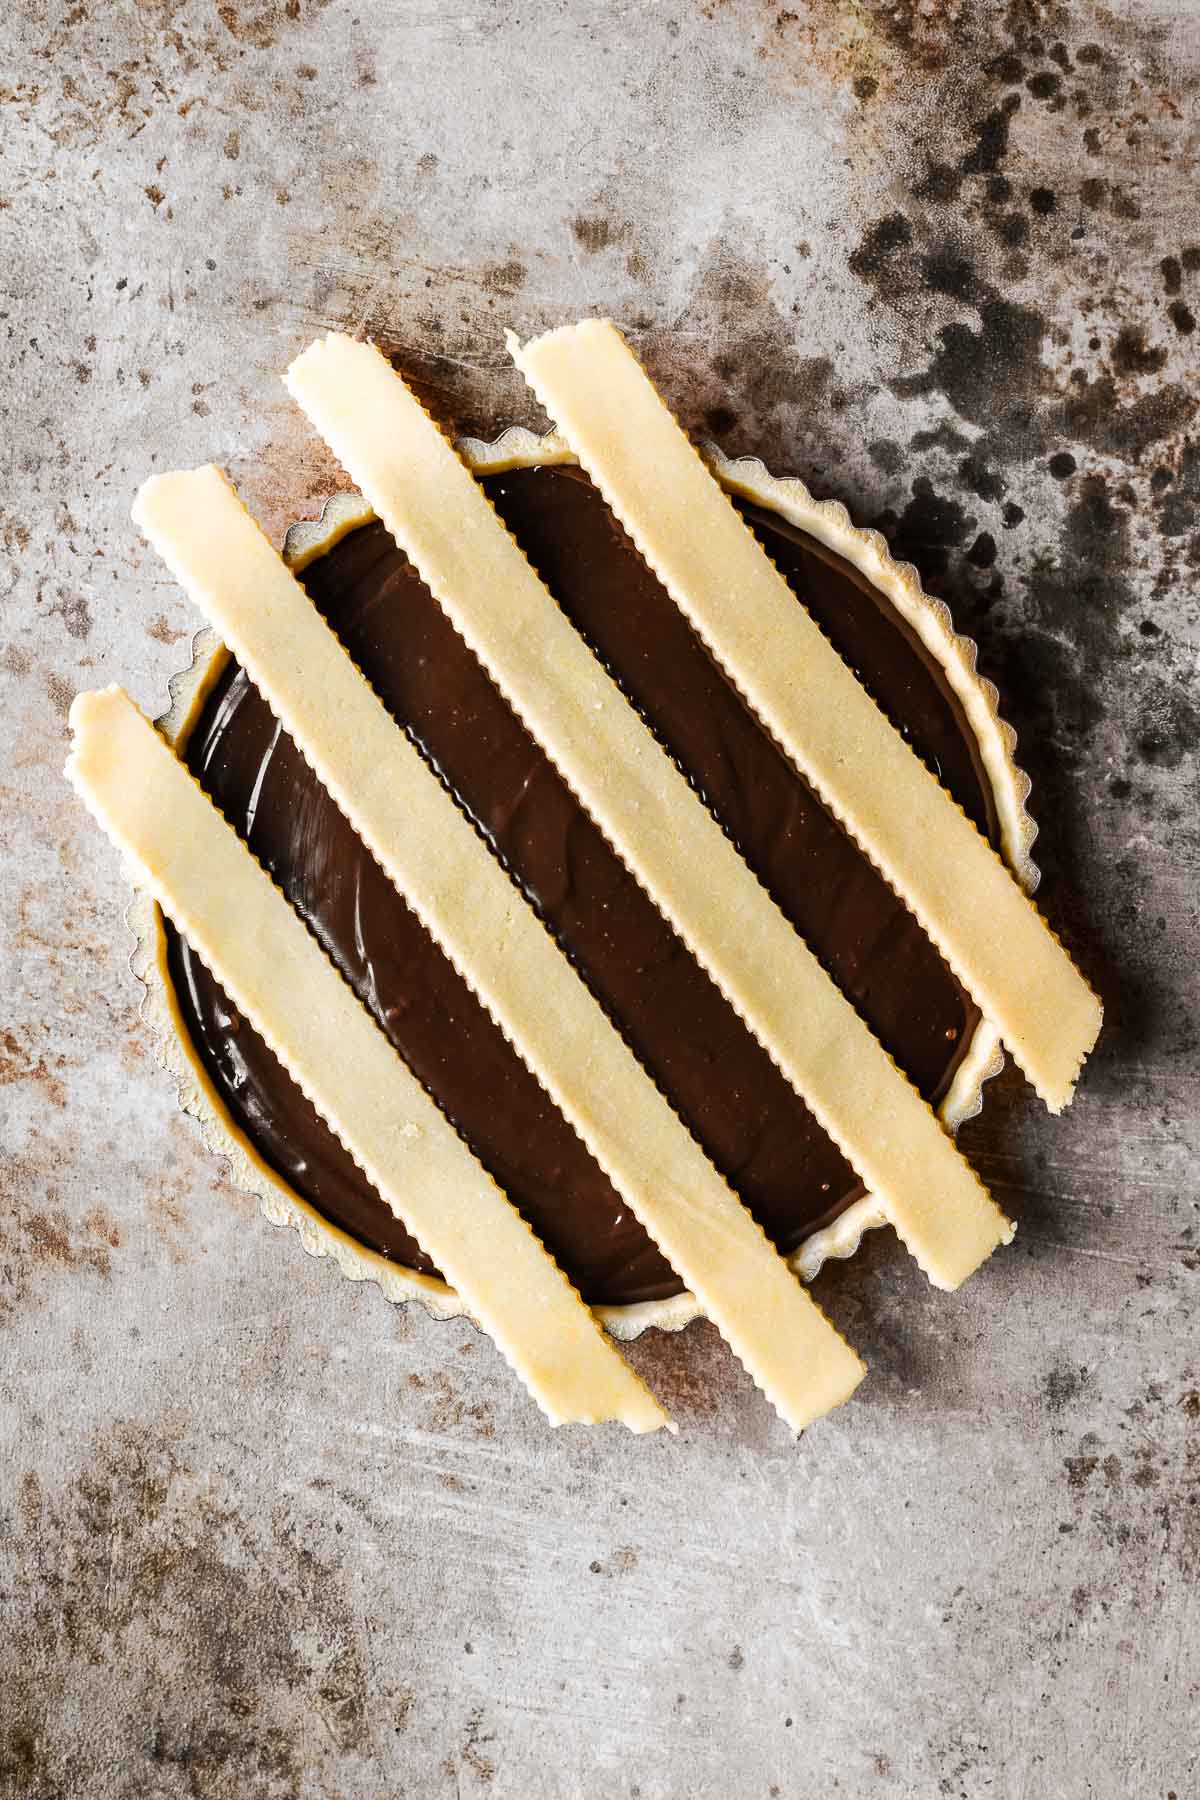 Strips of lattice dough on an unbaked chocolate filled tart.